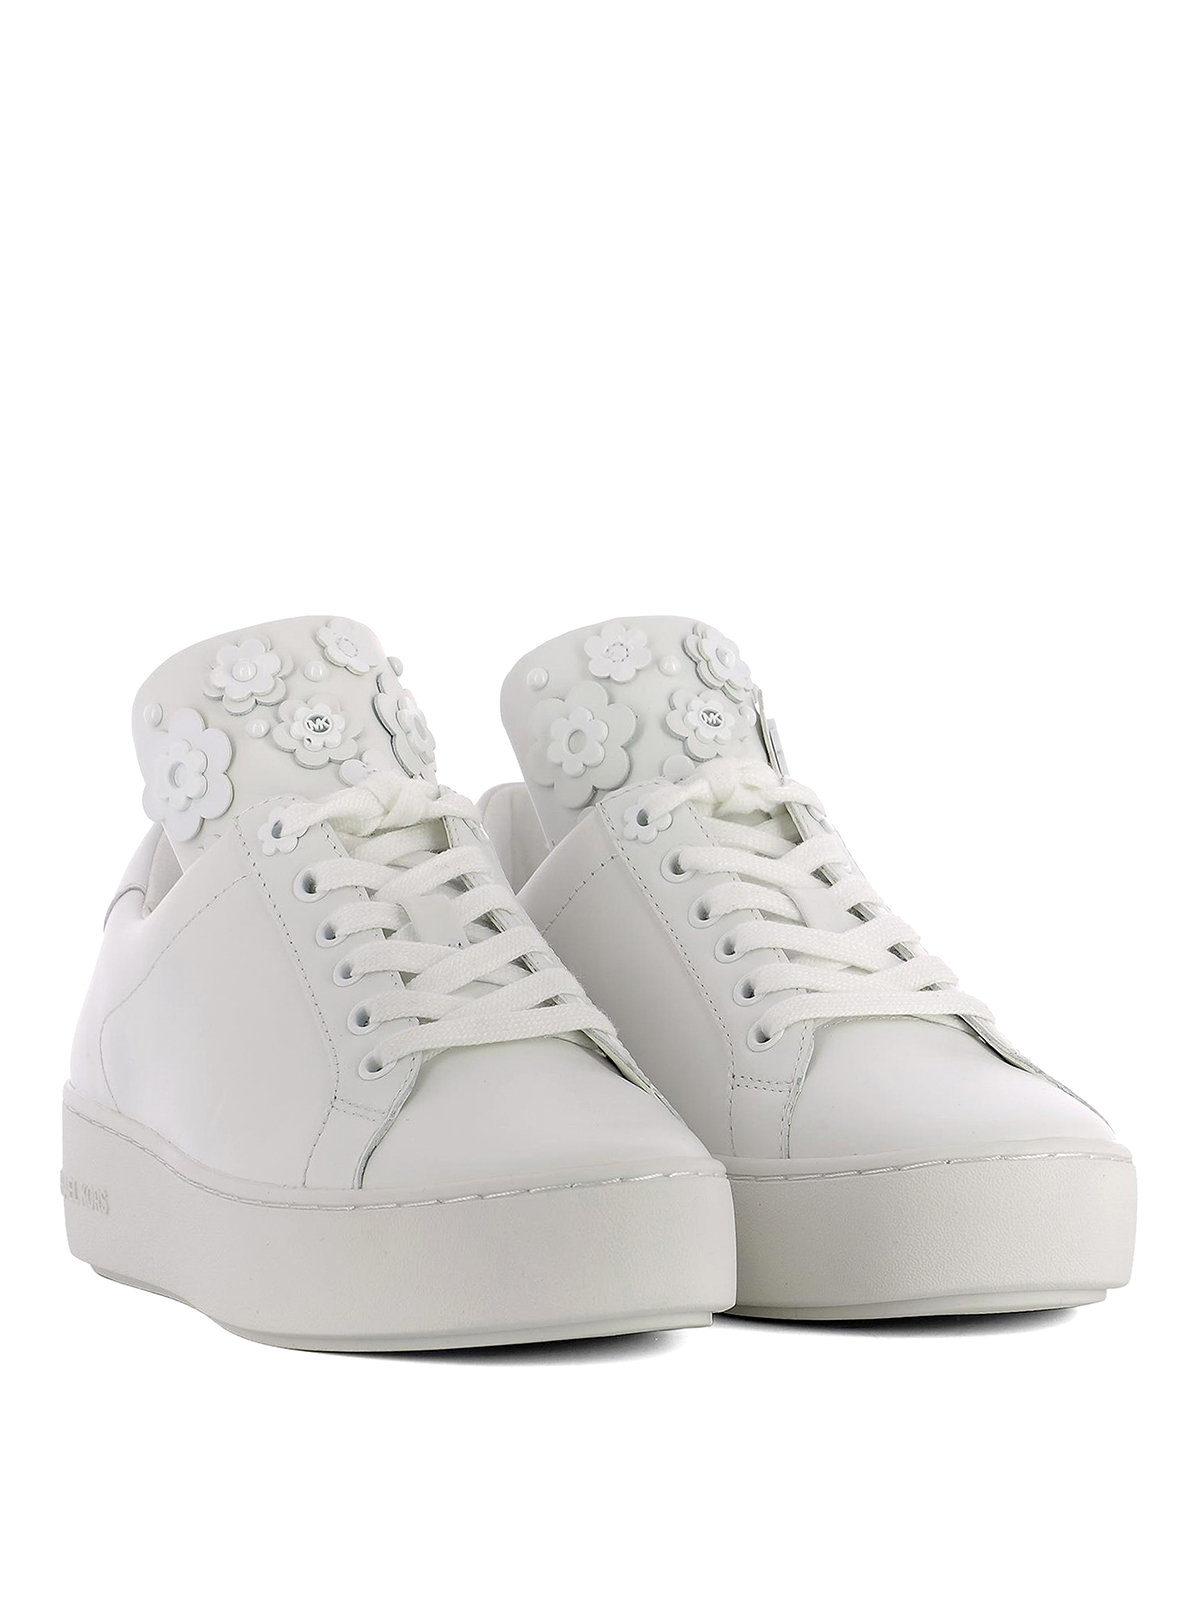 Michael Kors - Leather sneakers with 